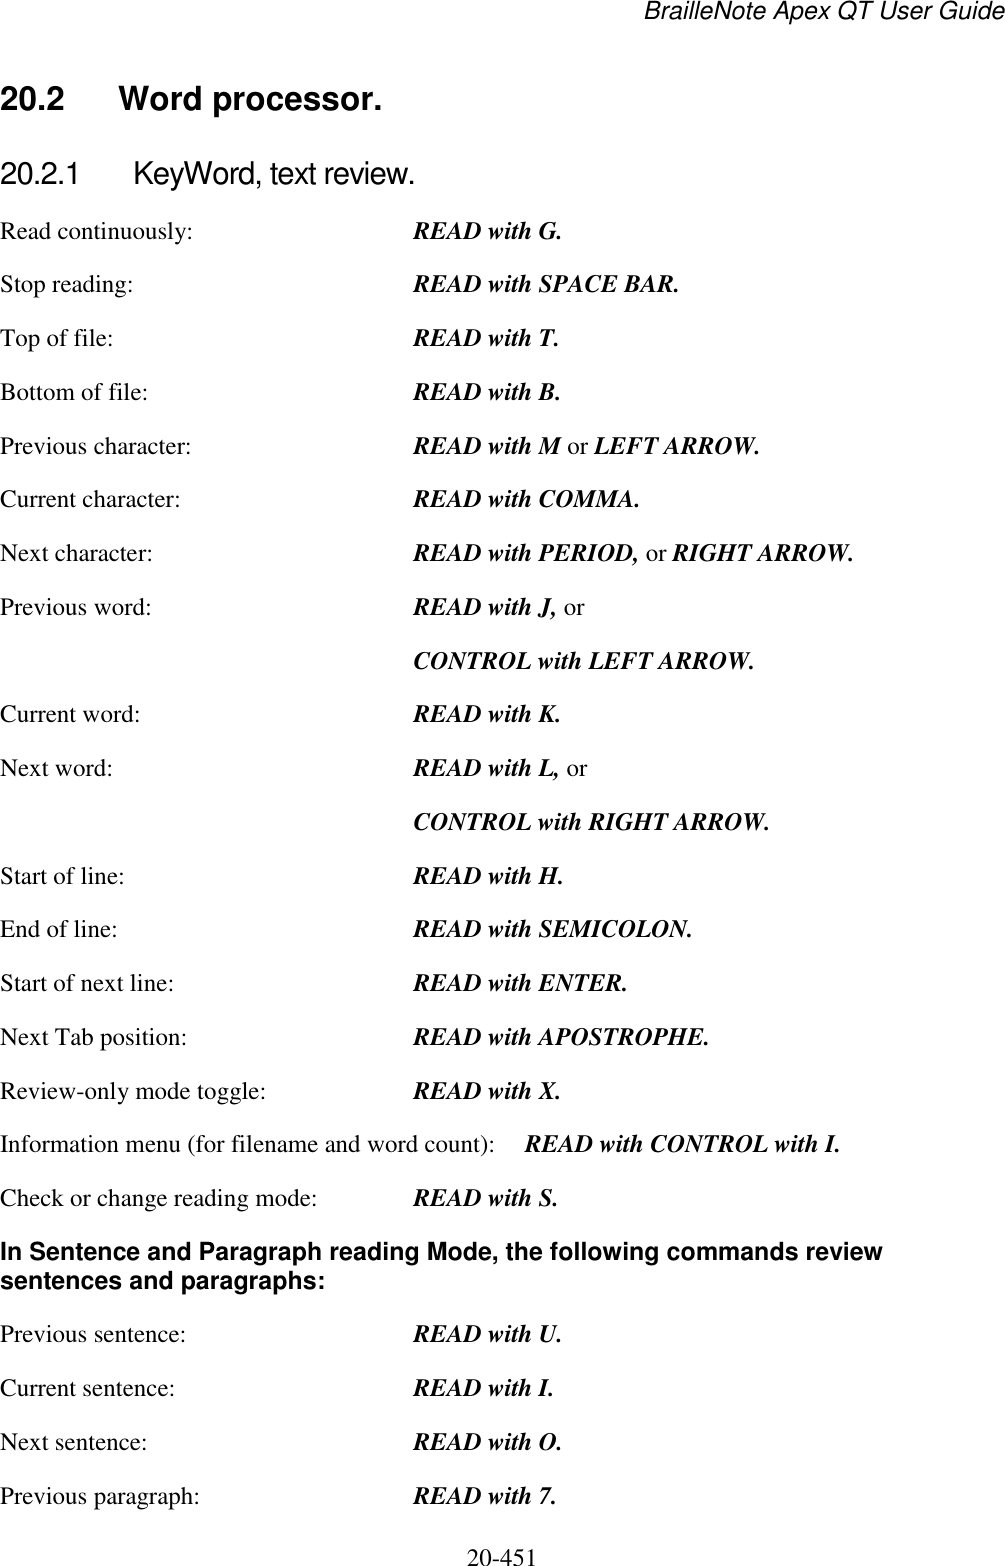 BrailleNote Apex QT User Guide  20-451   20.2  Word processor. 20.2.1  KeyWord, text review. Read continuously:  READ with G. Stop reading:  READ with SPACE BAR. Top of file:  READ with T. Bottom of file:  READ with B. Previous character:  READ with M or LEFT ARROW. Current character:  READ with COMMA. Next character:  READ with PERIOD, or RIGHT ARROW. Previous word:  READ with J, or  CONTROL with LEFT ARROW. Current word:  READ with K. Next word:  READ with L, or  CONTROL with RIGHT ARROW. Start of line:  READ with H. End of line:  READ with SEMICOLON. Start of next line:  READ with ENTER. Next Tab position:  READ with APOSTROPHE. Review-only mode toggle:  READ with X. Information menu (for filename and word count):  READ with CONTROL with I. Check or change reading mode:  READ with S. In Sentence and Paragraph reading Mode, the following commands review sentences and paragraphs: Previous sentence:  READ with U. Current sentence:  READ with I. Next sentence:  READ with O. Previous paragraph:  READ with 7. 